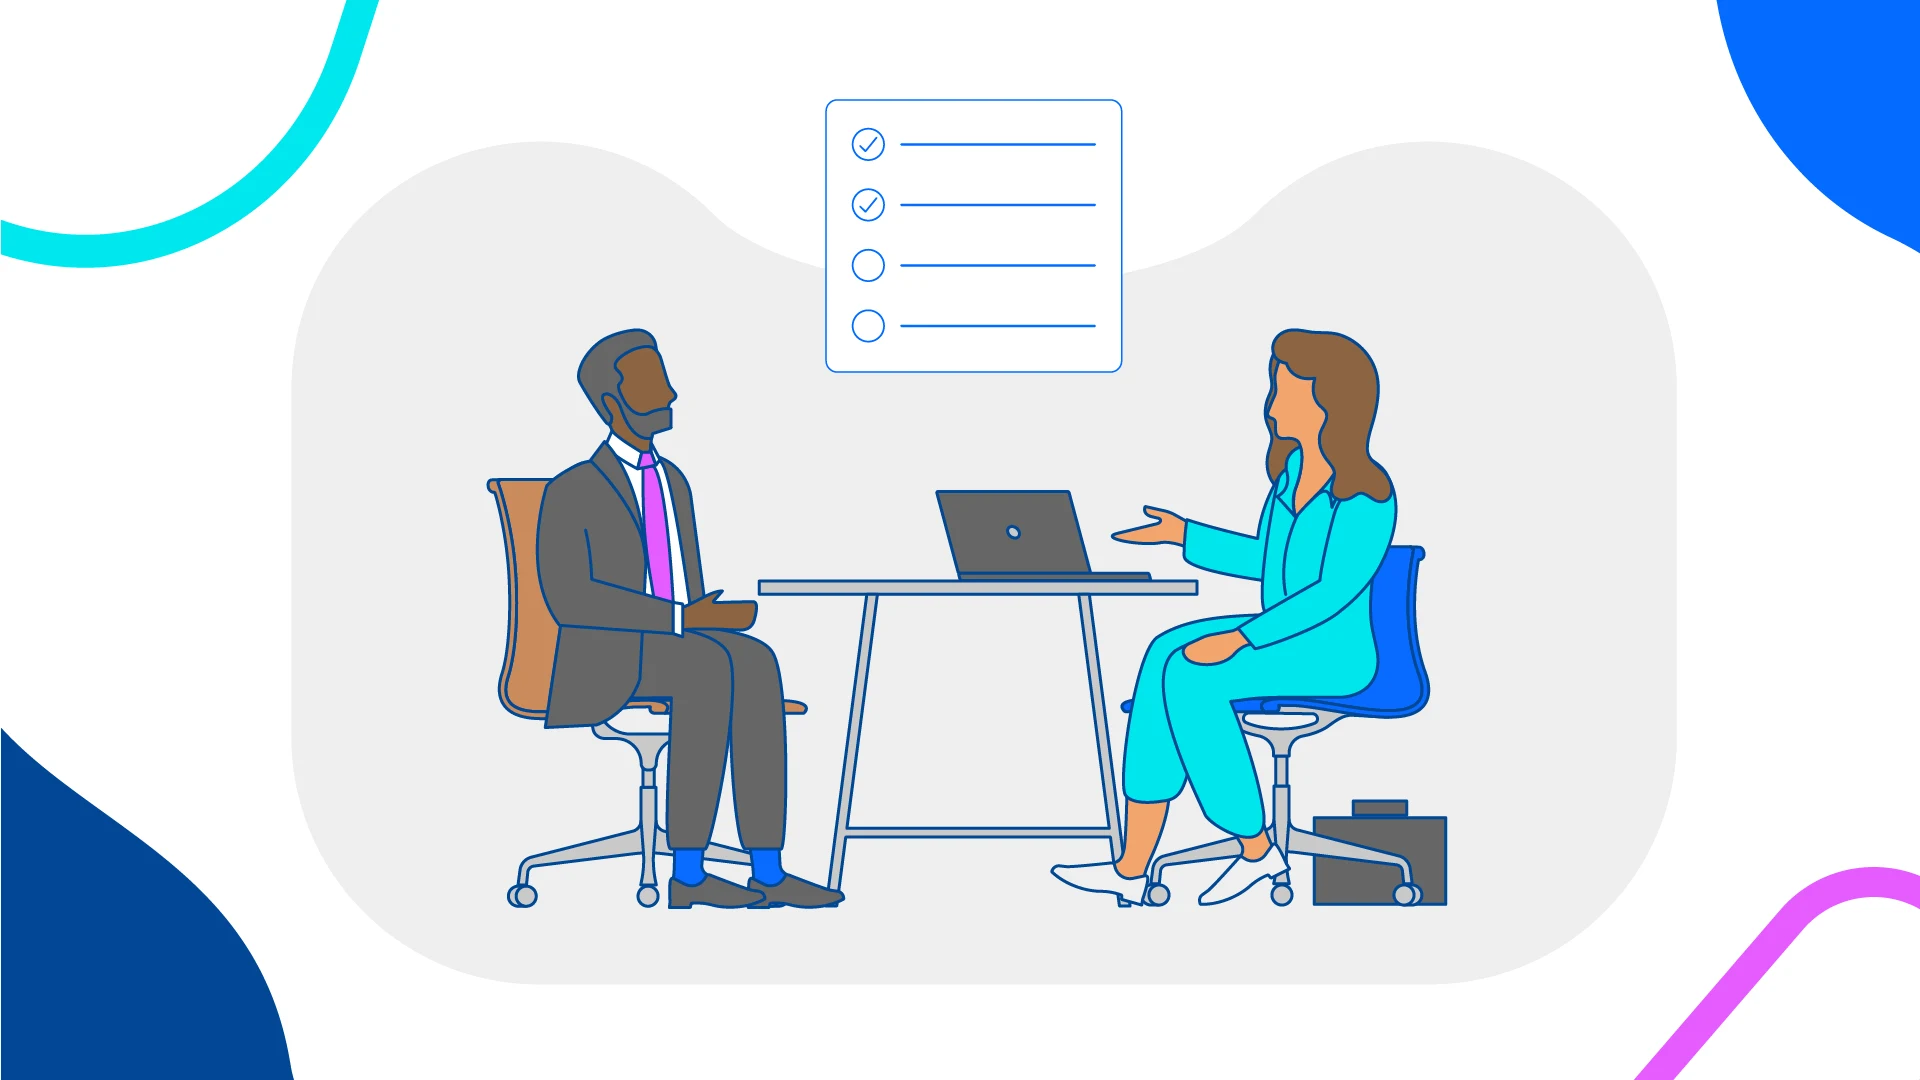 Learn how interview schedule templates can create a better hiring process and candidate experience.